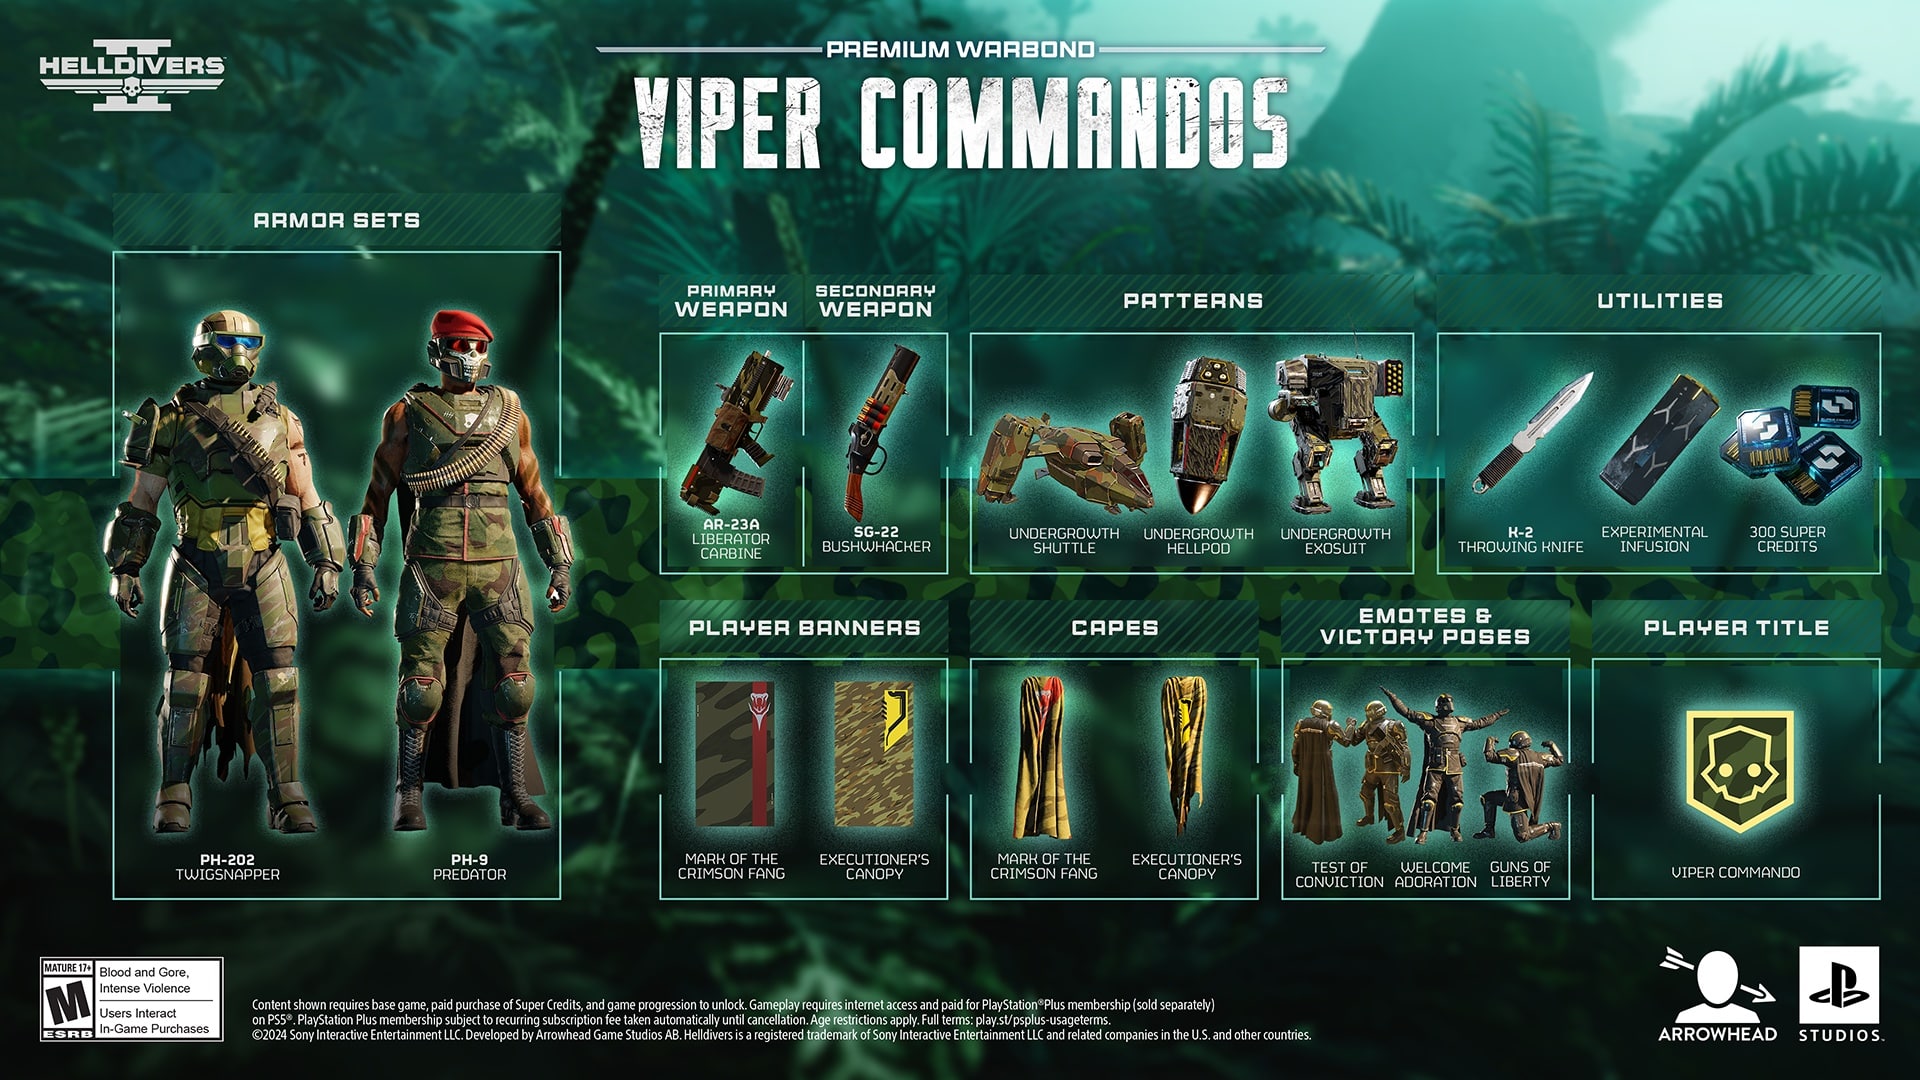 (The new Warbond Premium Warbond Viper Commandos is fully dedicated to the jungle theme.)